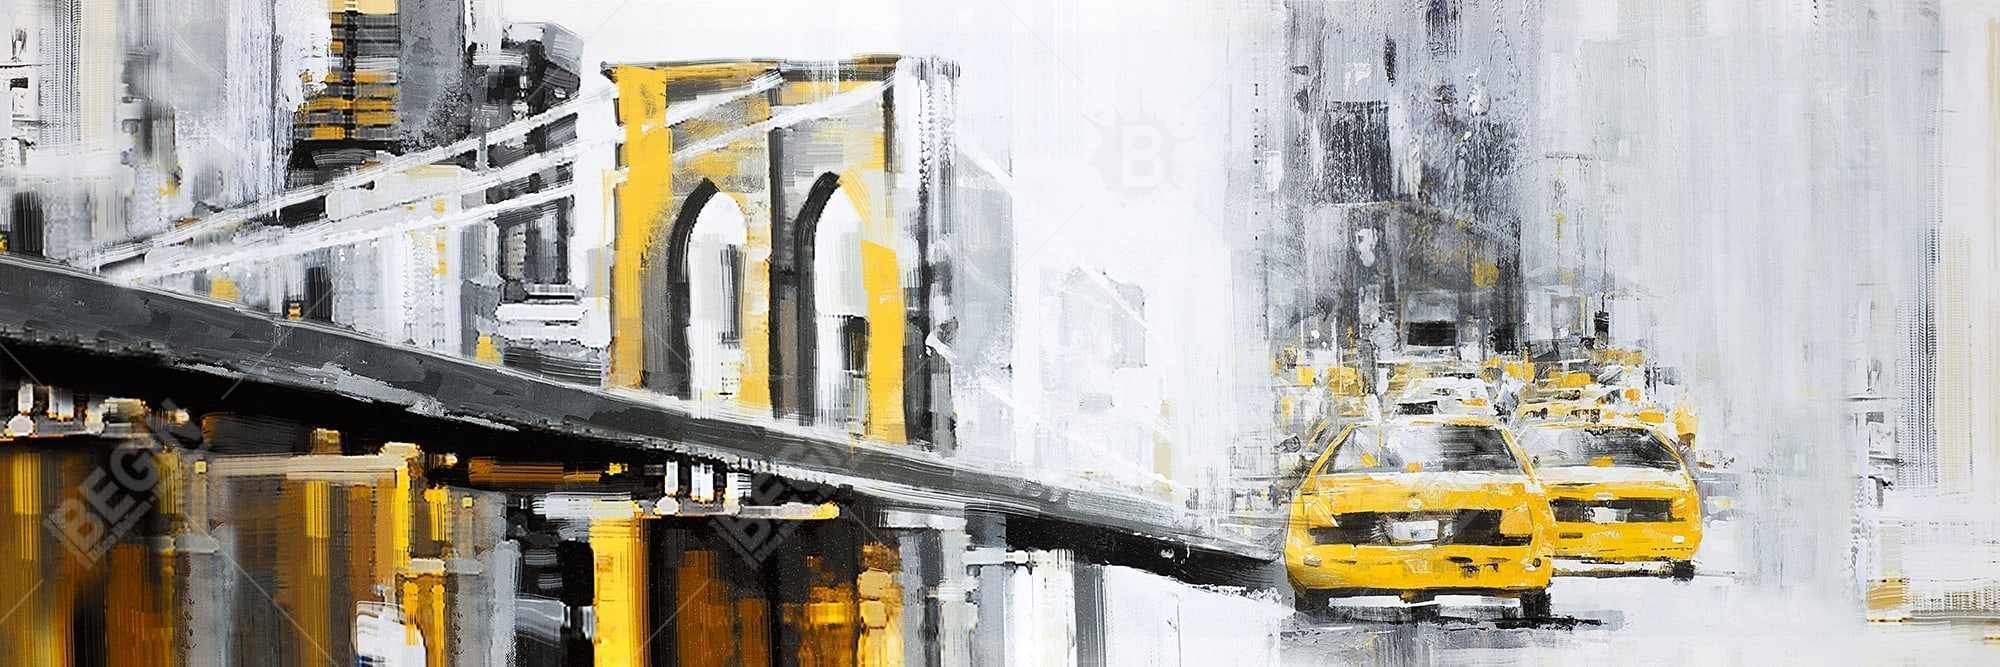 Pont brooklyn jaune et taxis